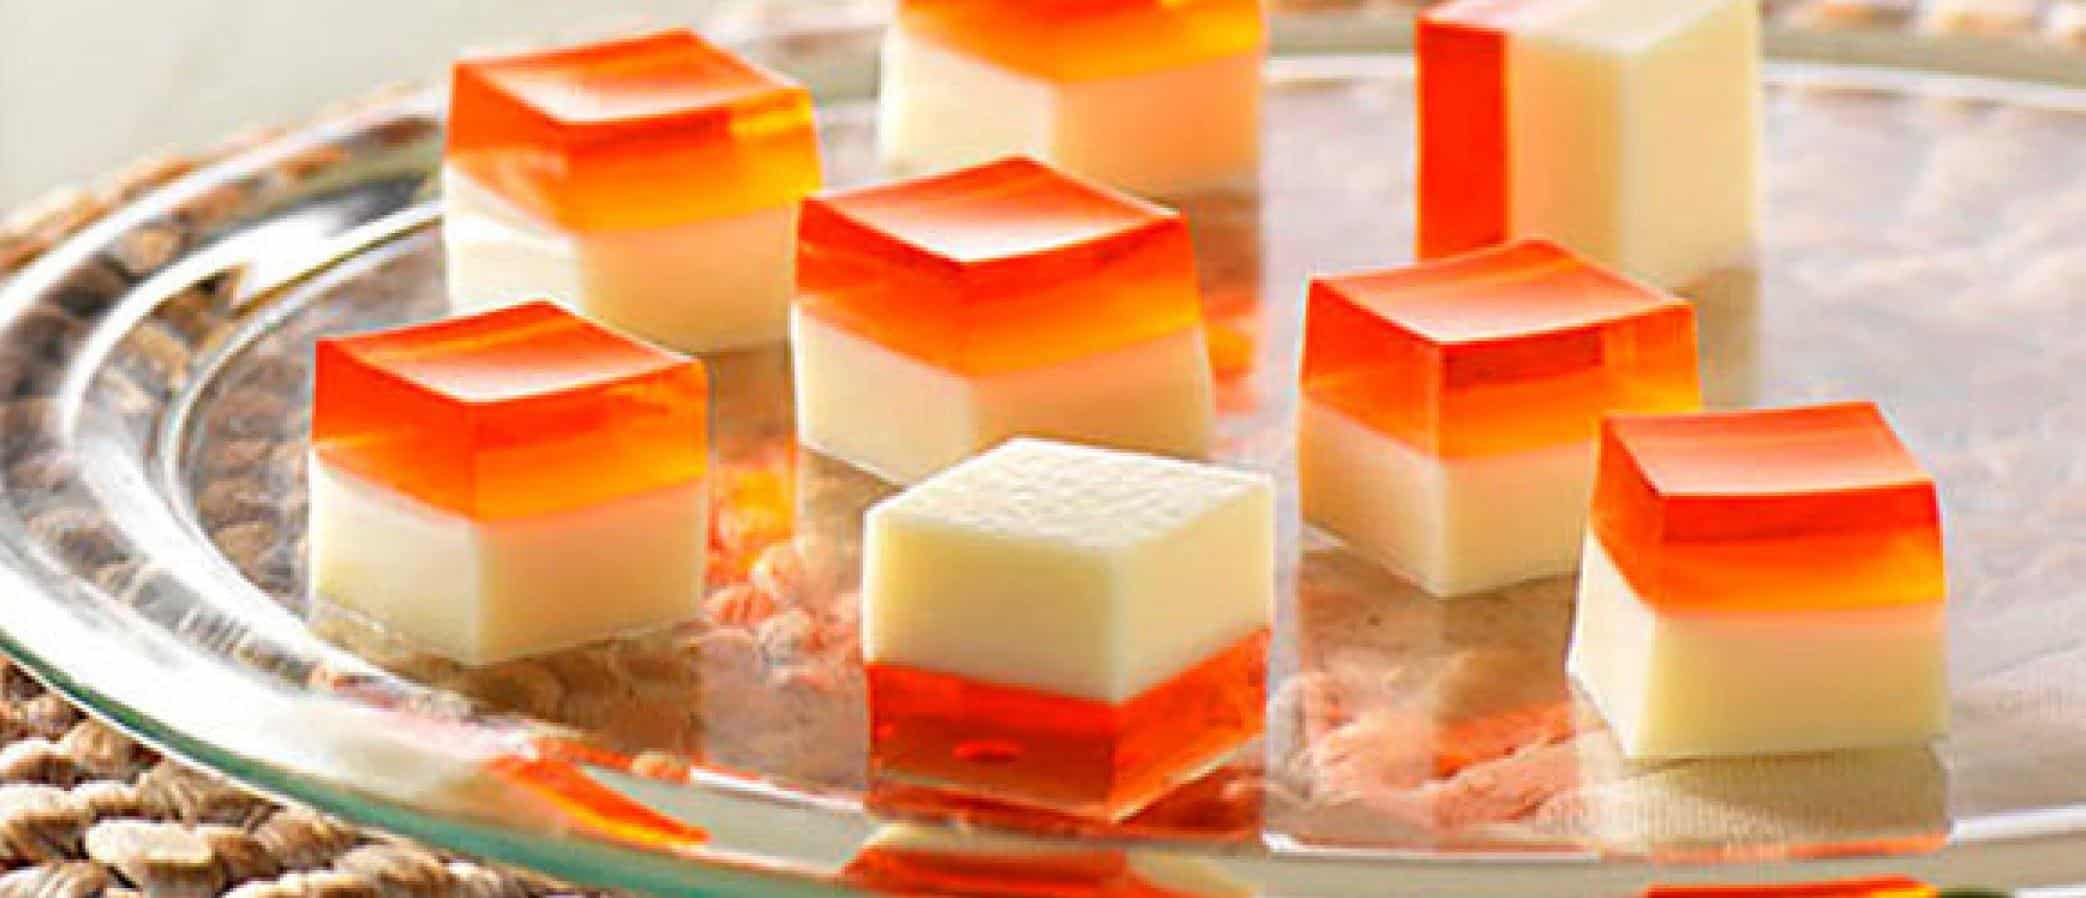  Get ready to wiggle and jiggle with these delicious creamy jigglers!